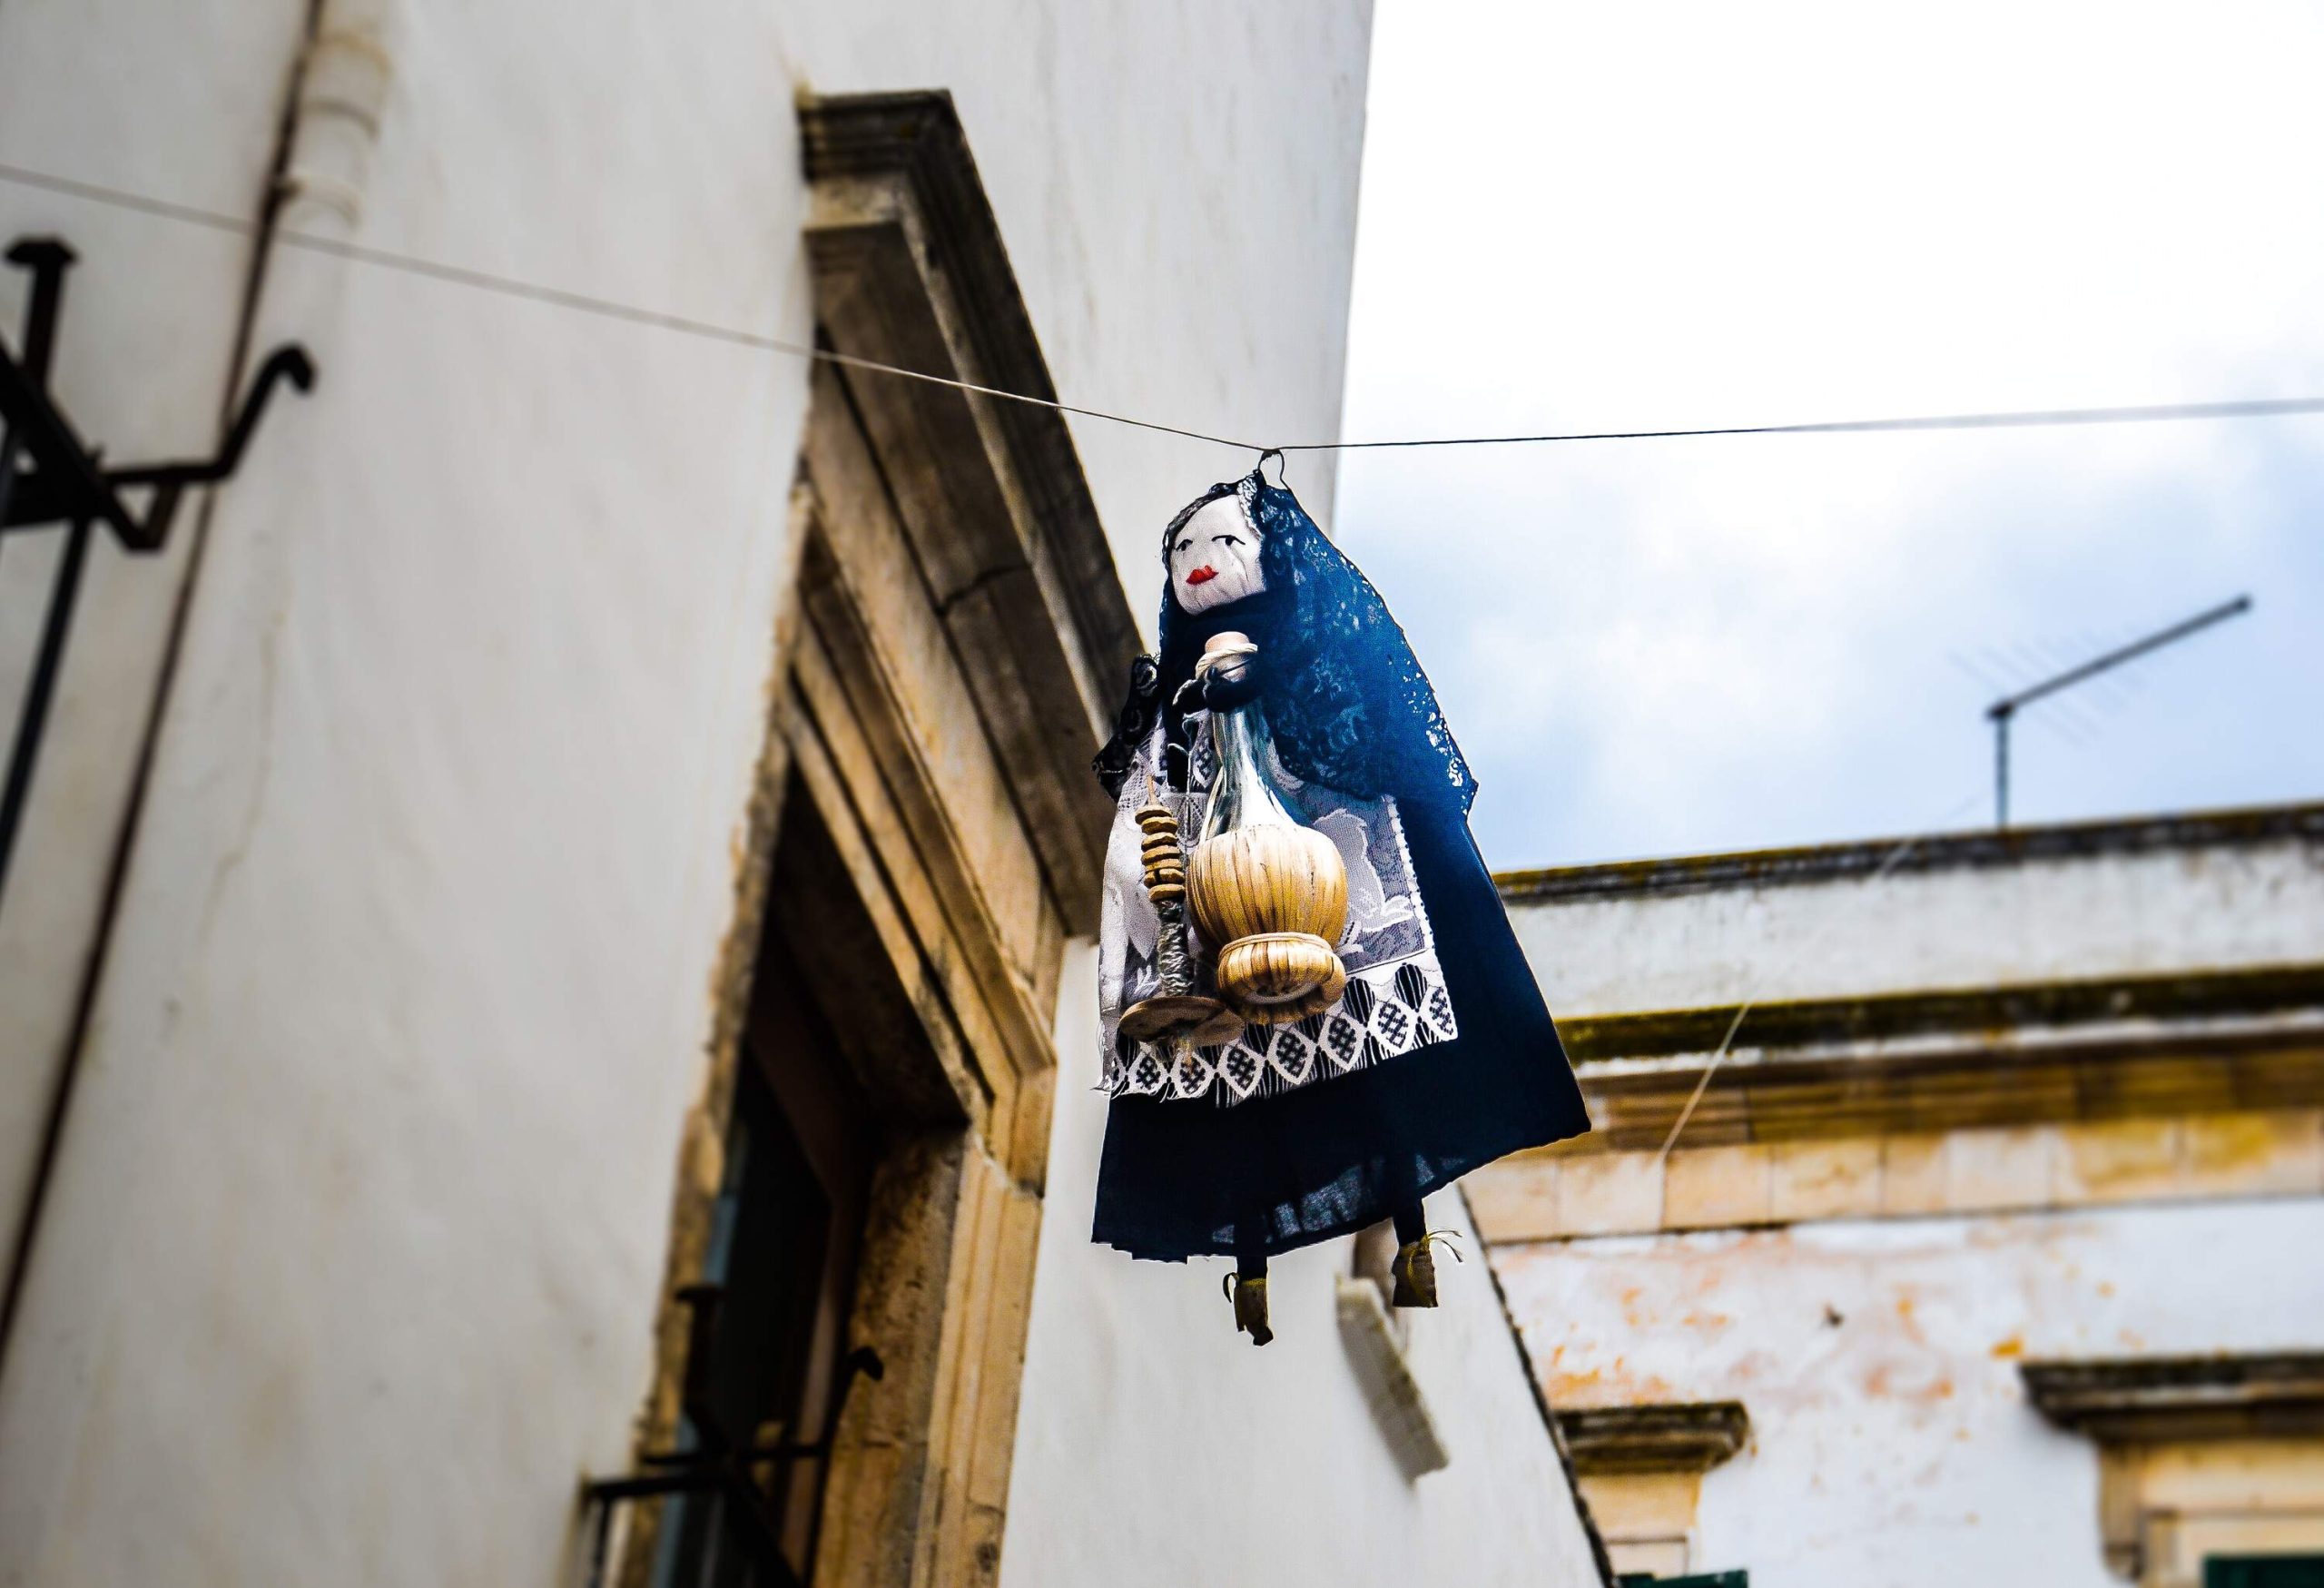 A traditional folk doll hangs in the middle of an old building.